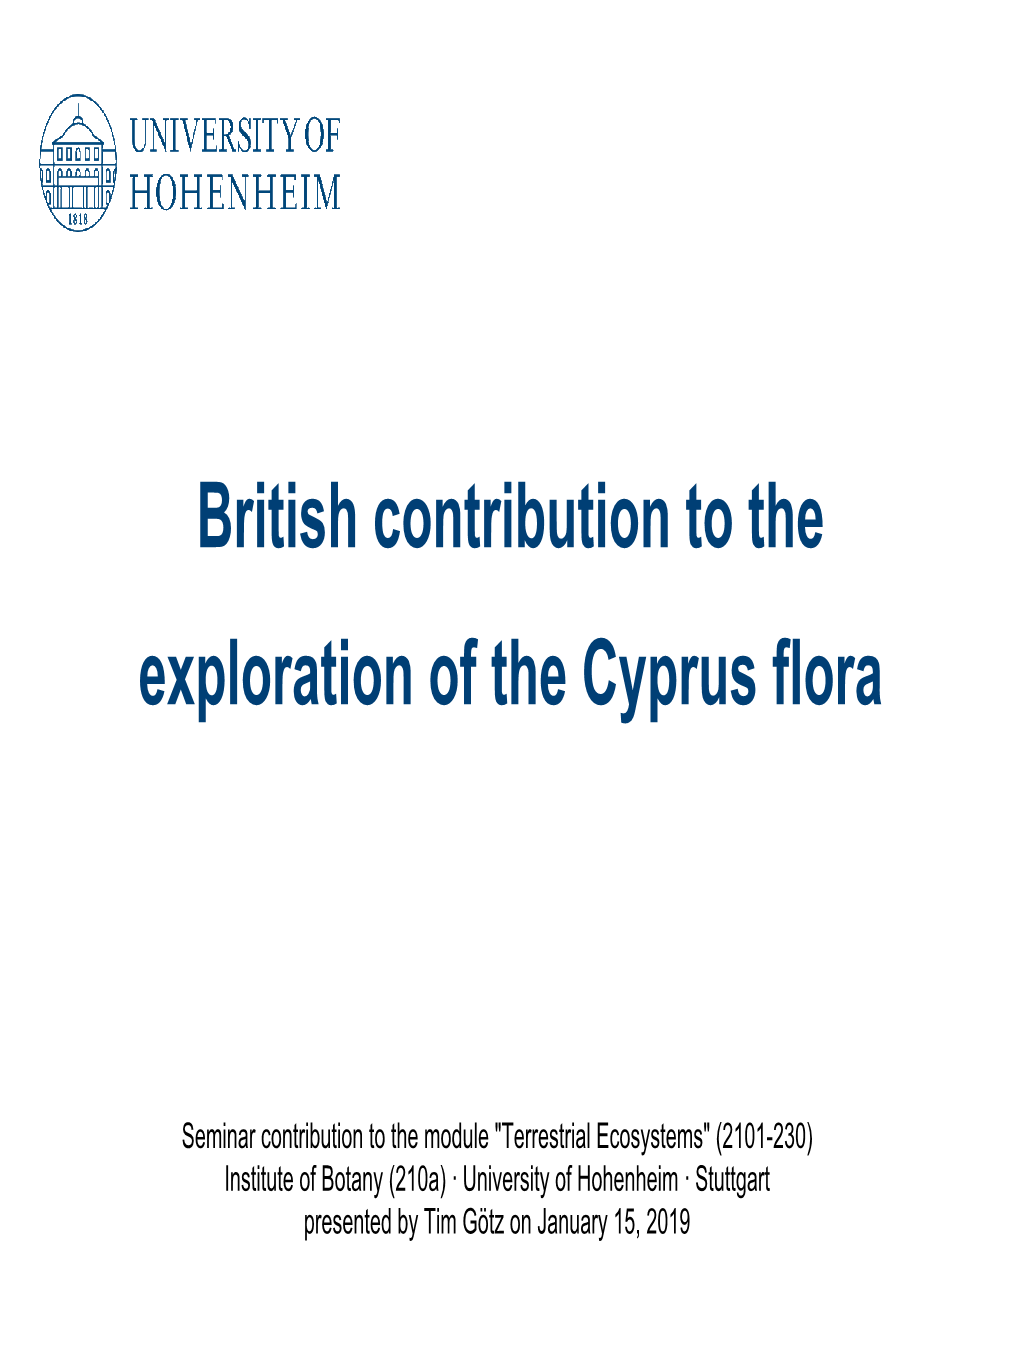 British Contribution to the Exploration of the Cyprus Flora